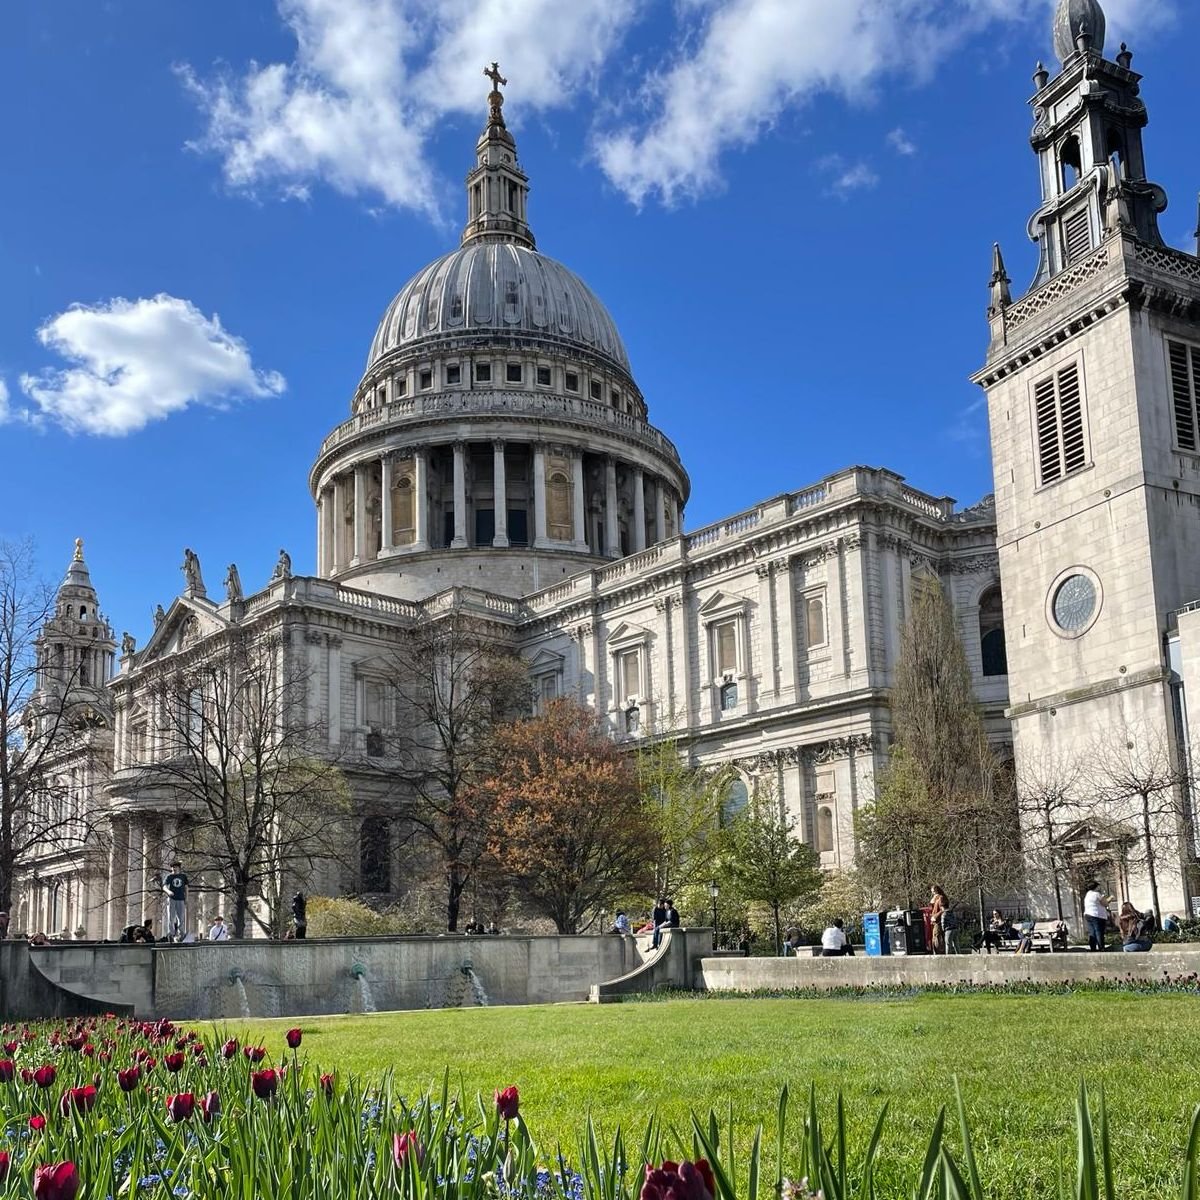 A group from our choir will be singing #ChoralEvensong at St Paul's Cathedral in London on Monday, May 20th!
This is a fantastic opportunity for us to sing in this historic and awe-inspiring setting.
Thanks to Jo Bond for a great spring photo!
#StPauls #StPaulsCathedral